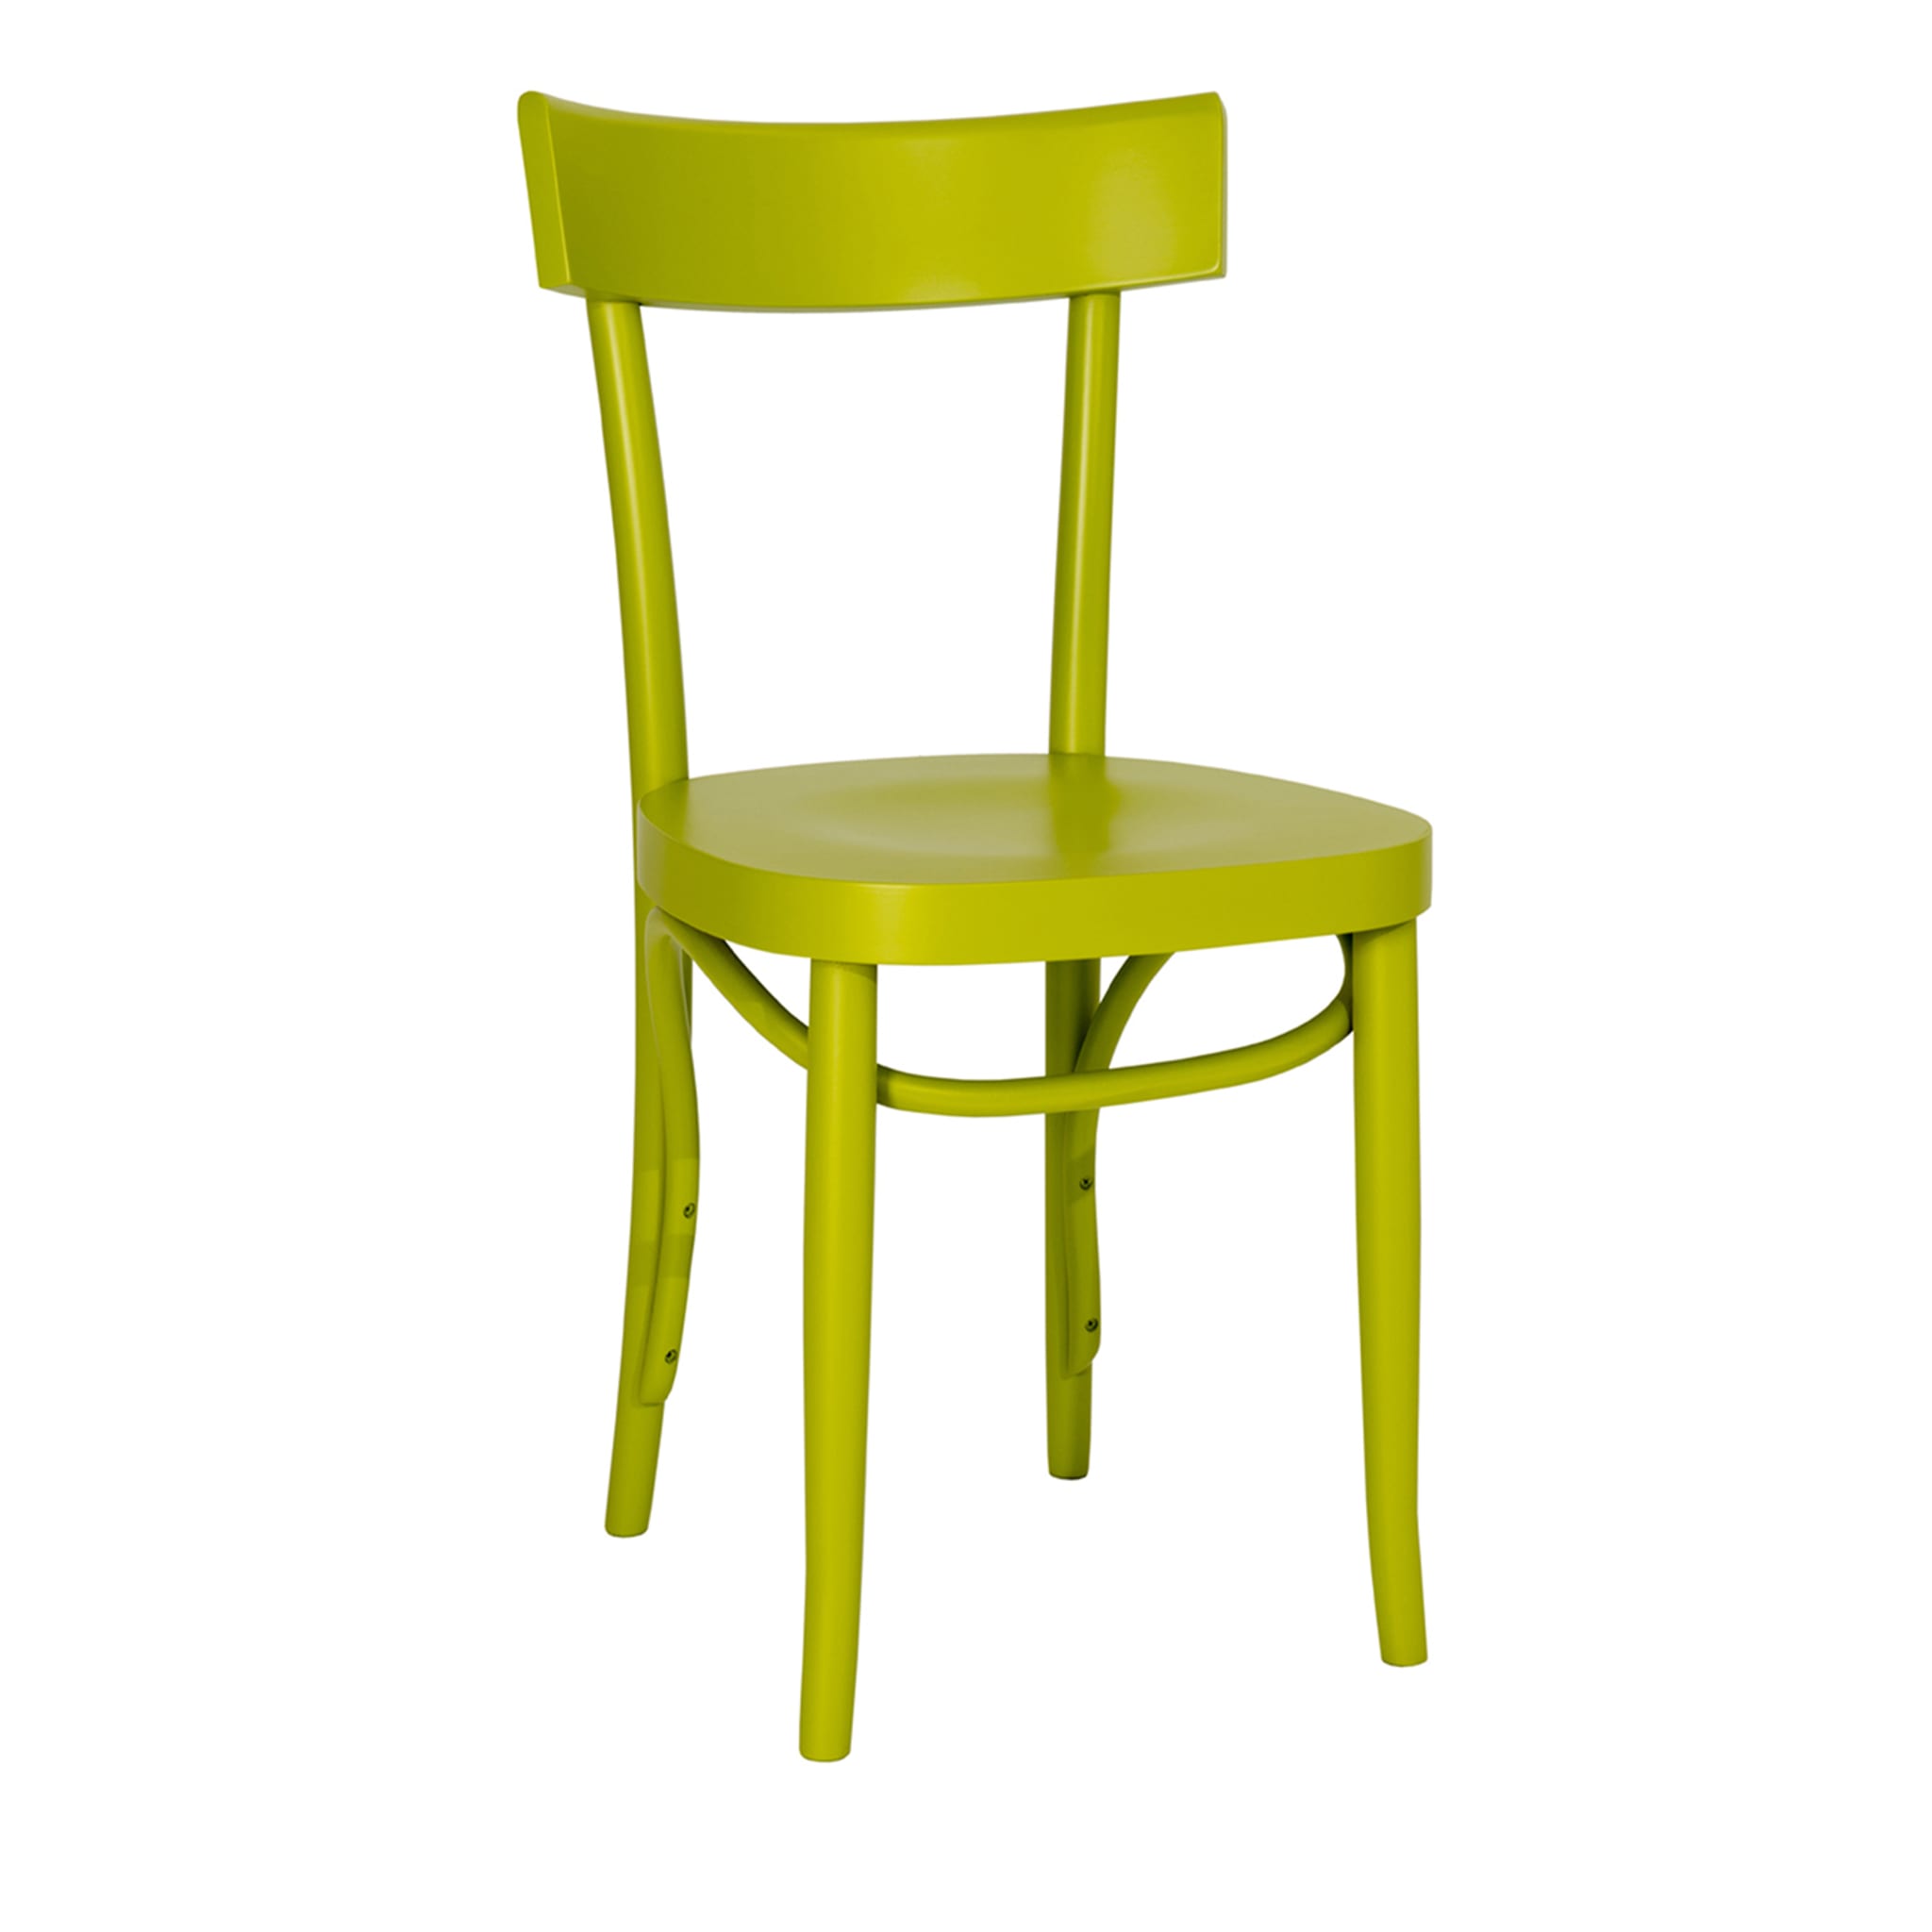 Brera Lime-Green Chair by W. Colico - Main view